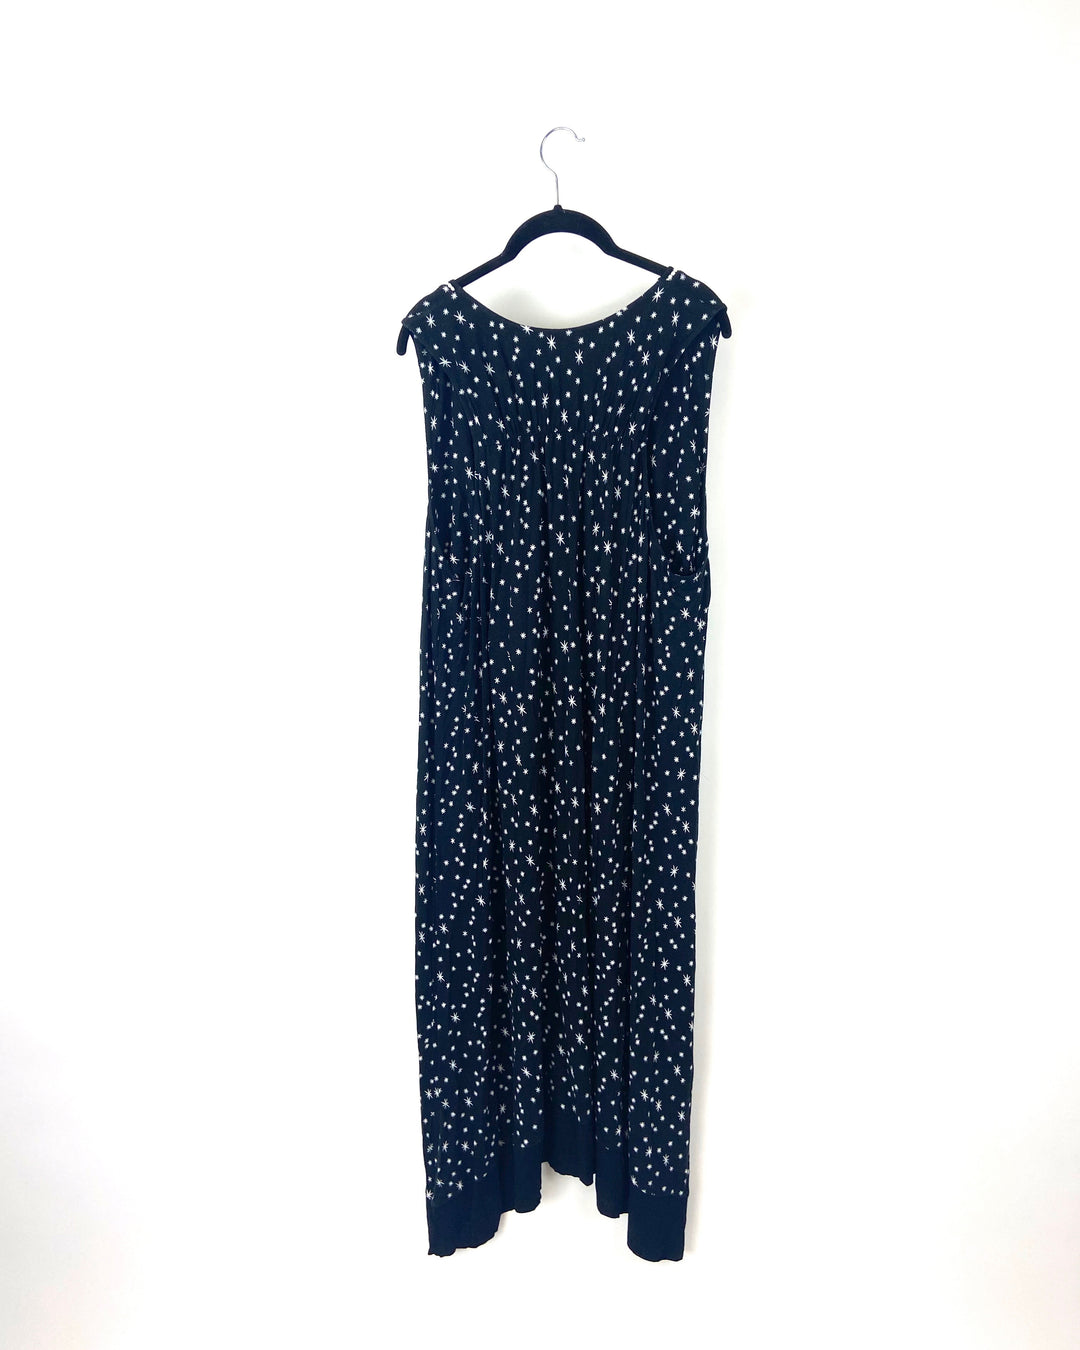 Black Patterned Nightgown - 2X